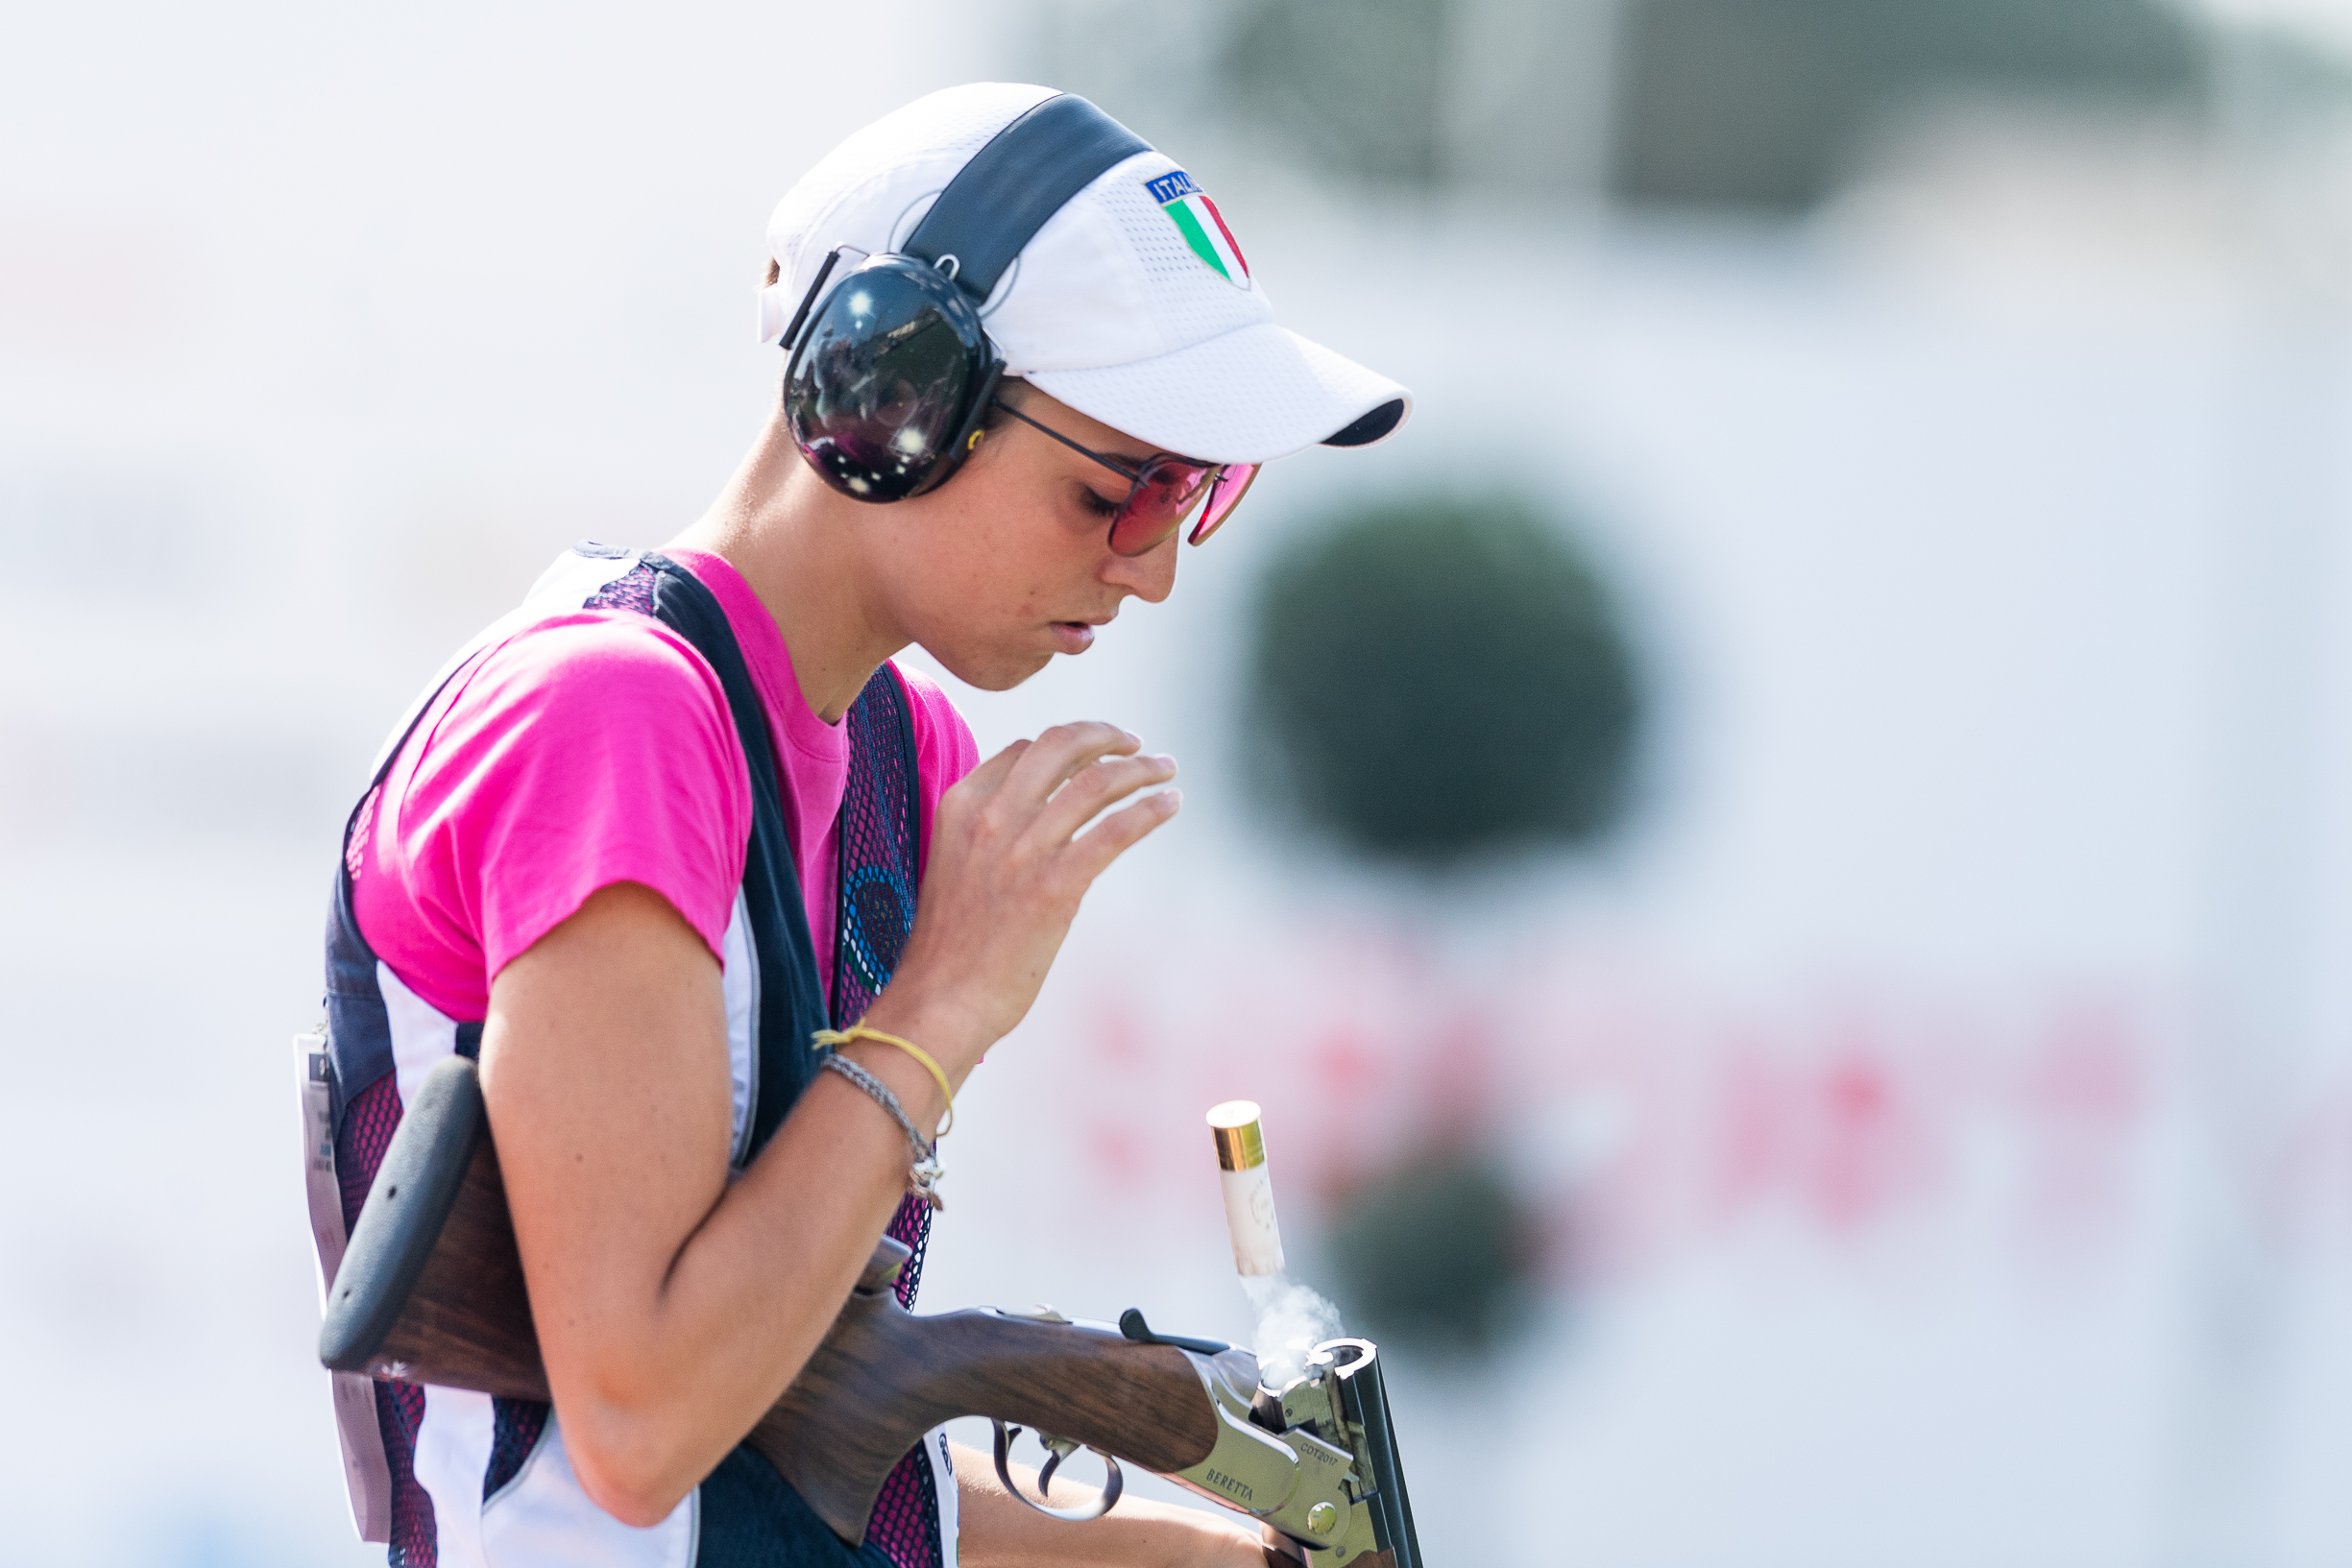 JESSICA ROSSI SECURES GOLD AND OLYMPIC QUOTA IN ACAPULCO